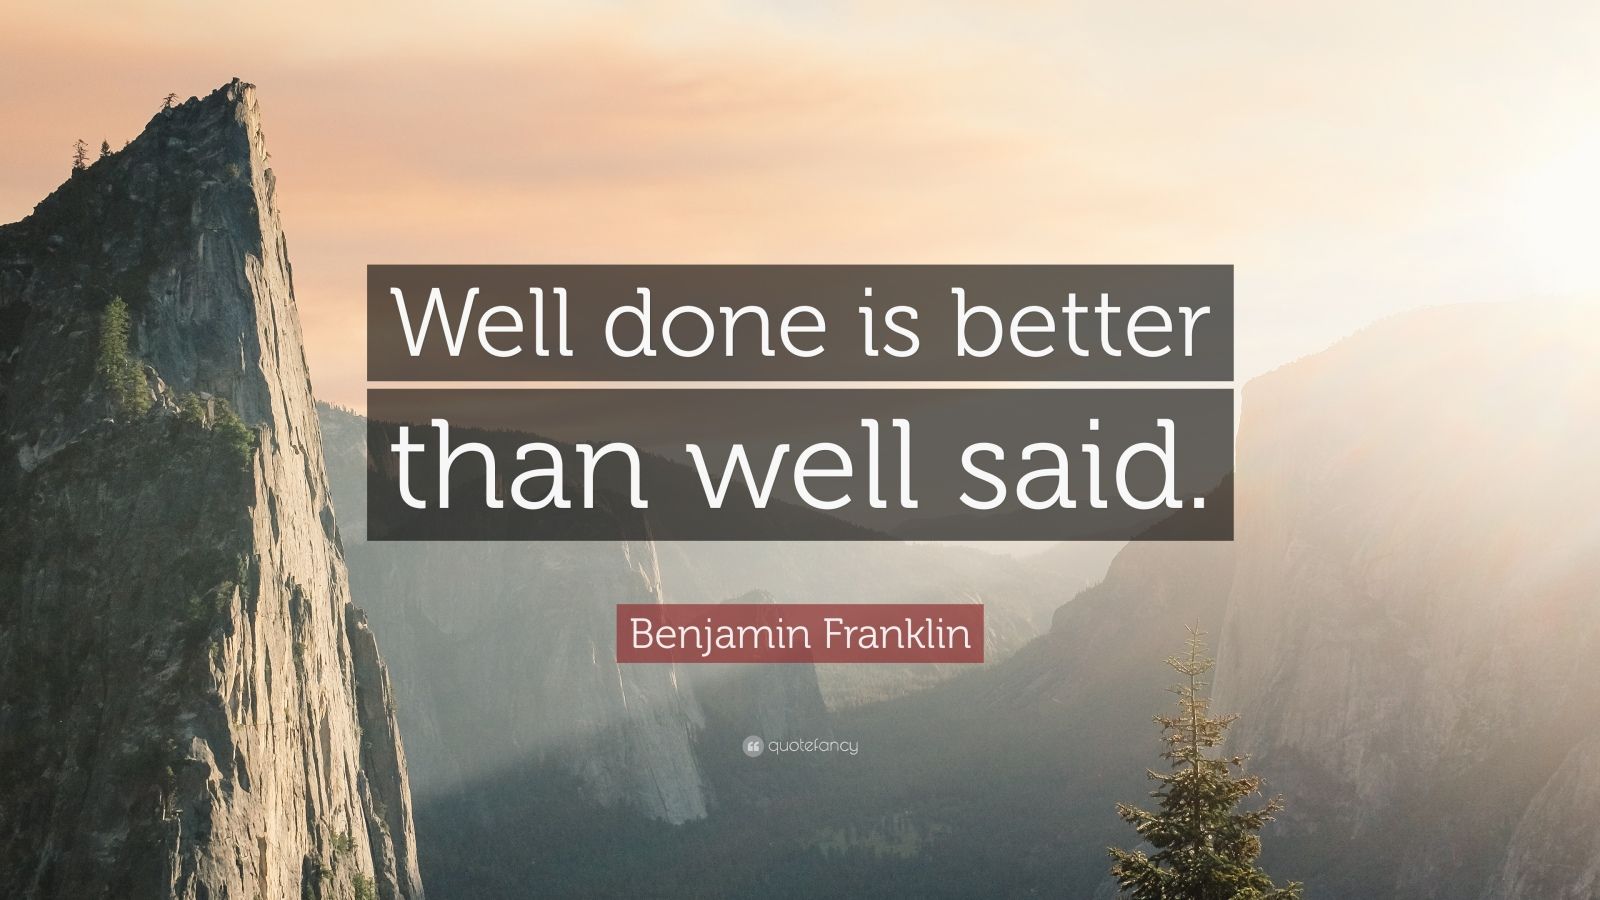 Benjamin Franklin Quote: "Well done is better than well said." (27 wallpapers) - Quotefancy